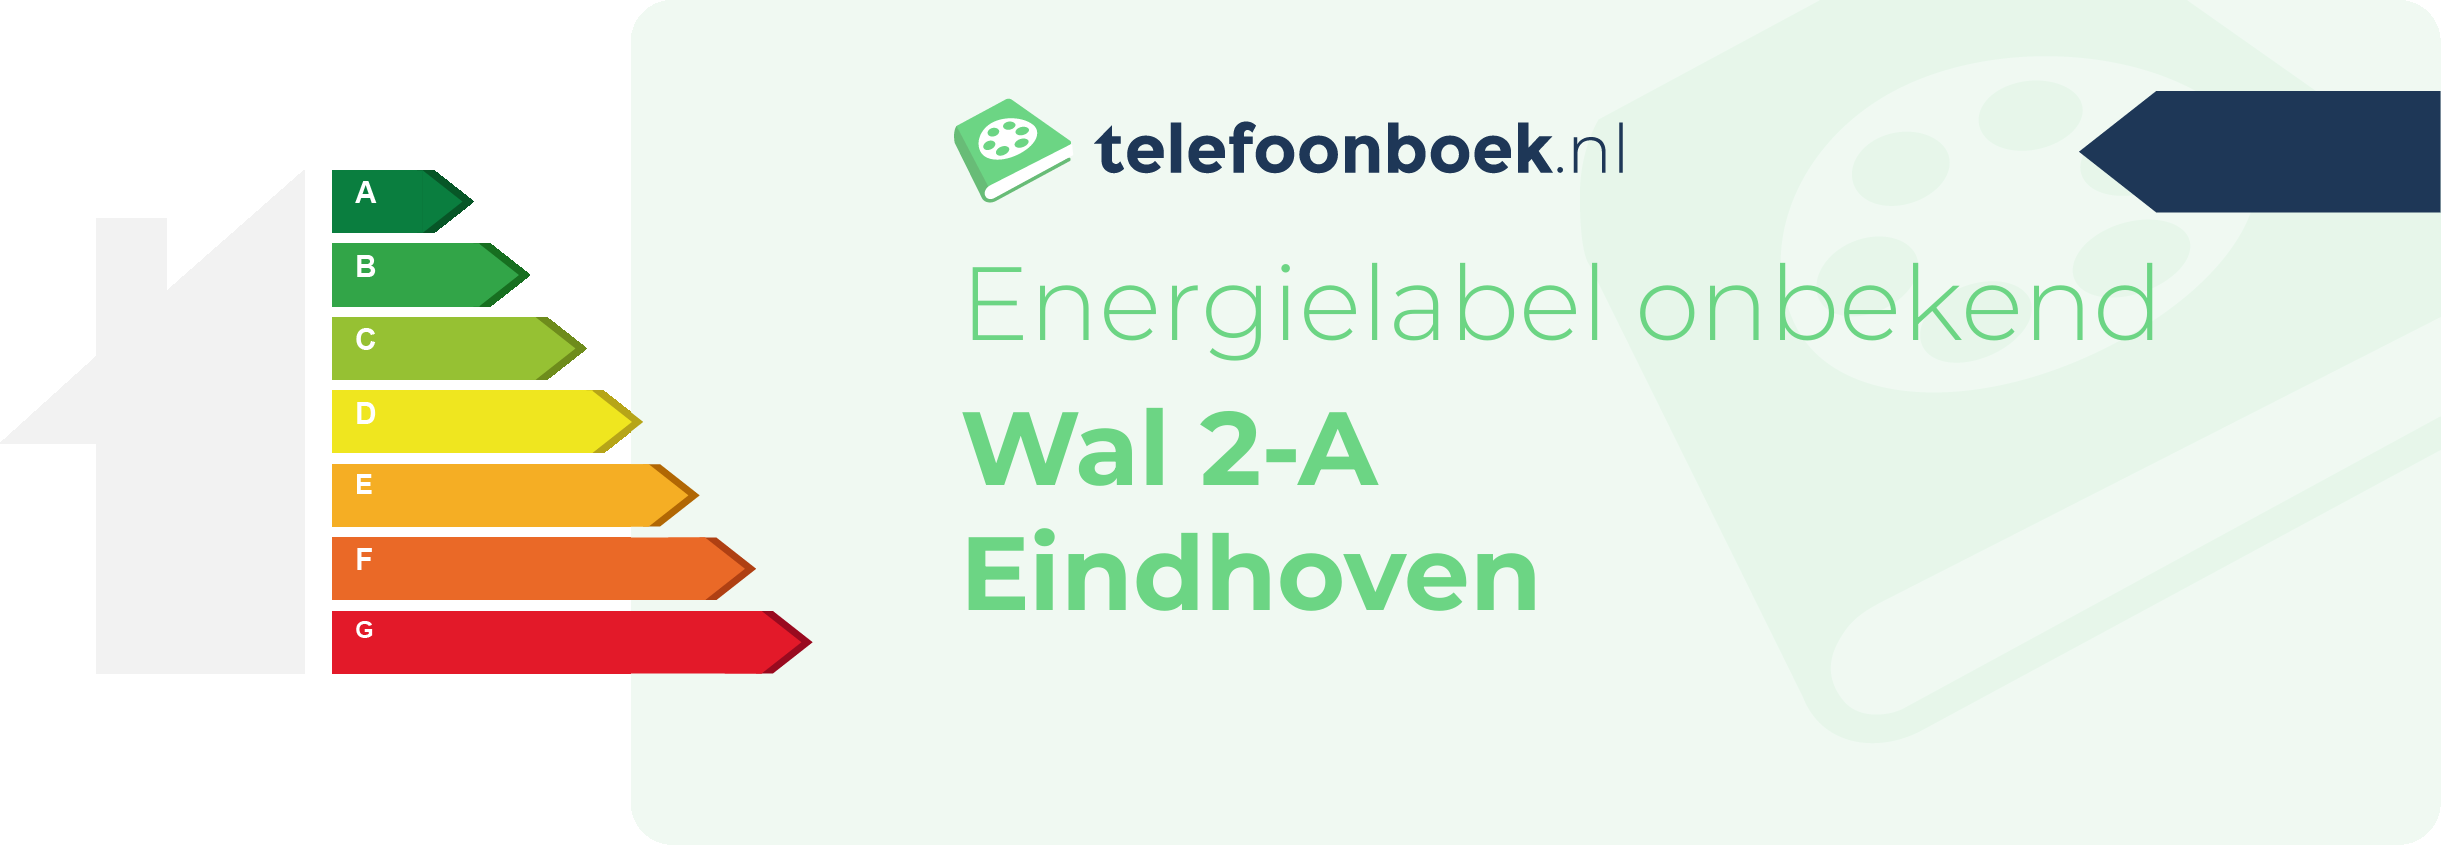 Energielabel Wal 2-A Eindhoven